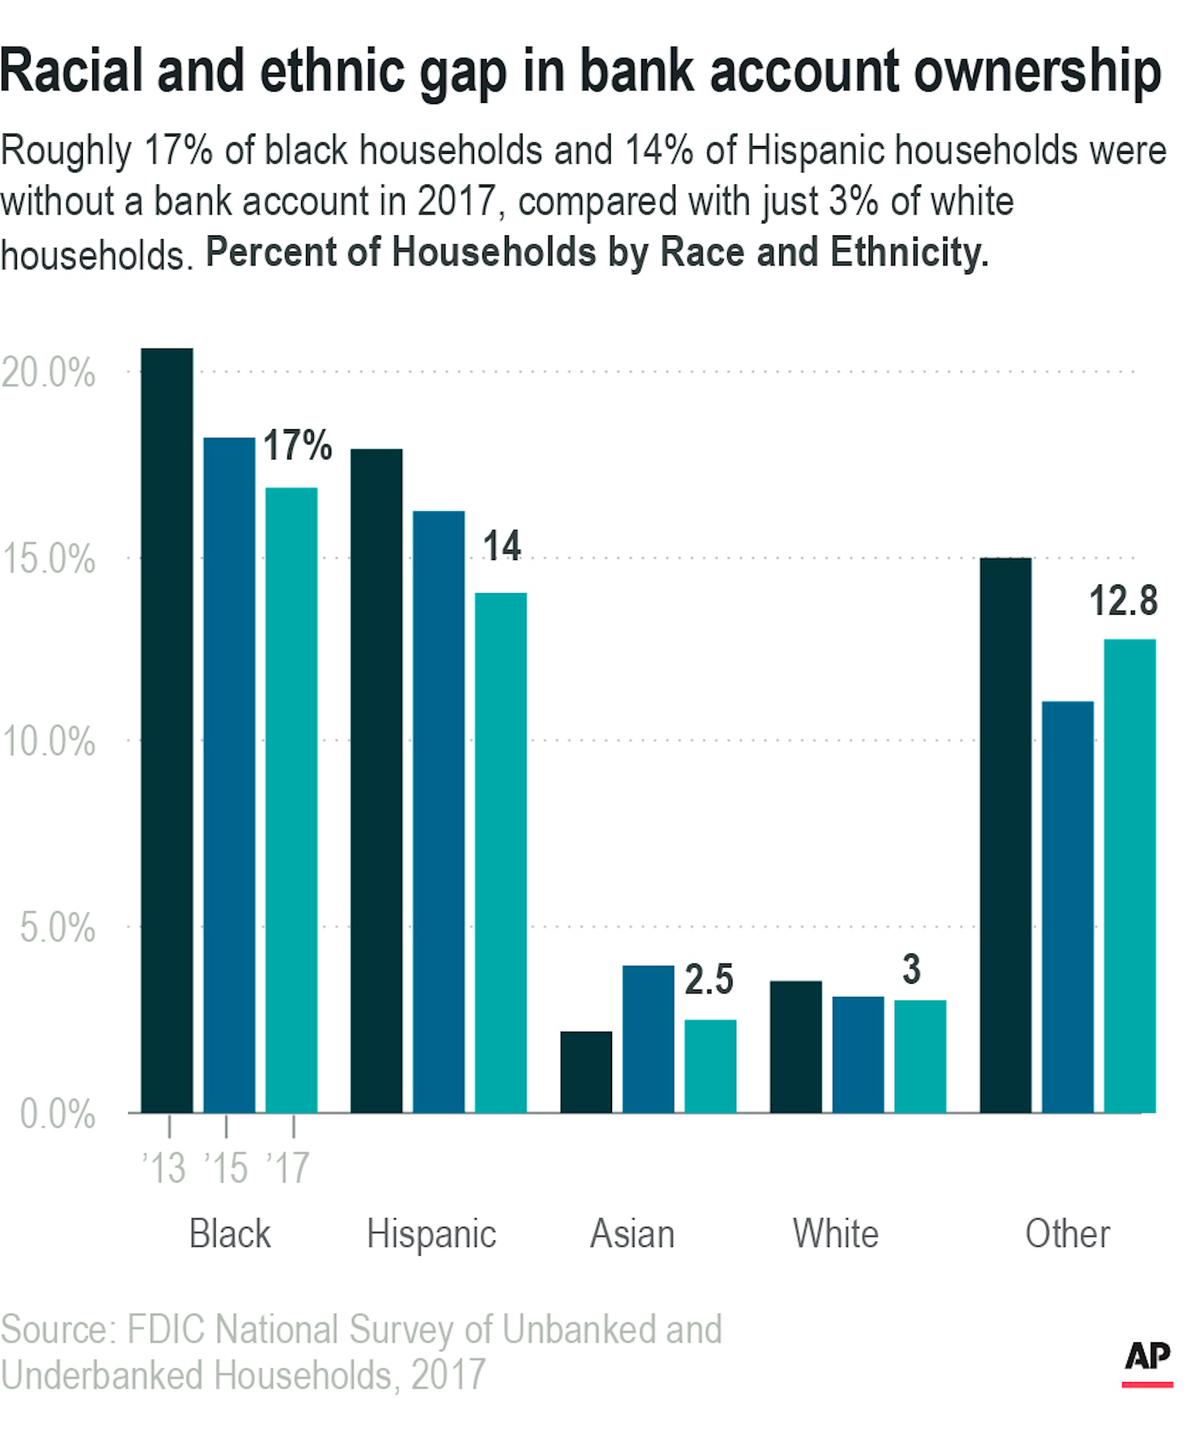 Roughly 17 percent of black households and 14 percent of Hispanic households were without a bank account in 2017, compared with just 3 percent of white households. (Graph from AP)